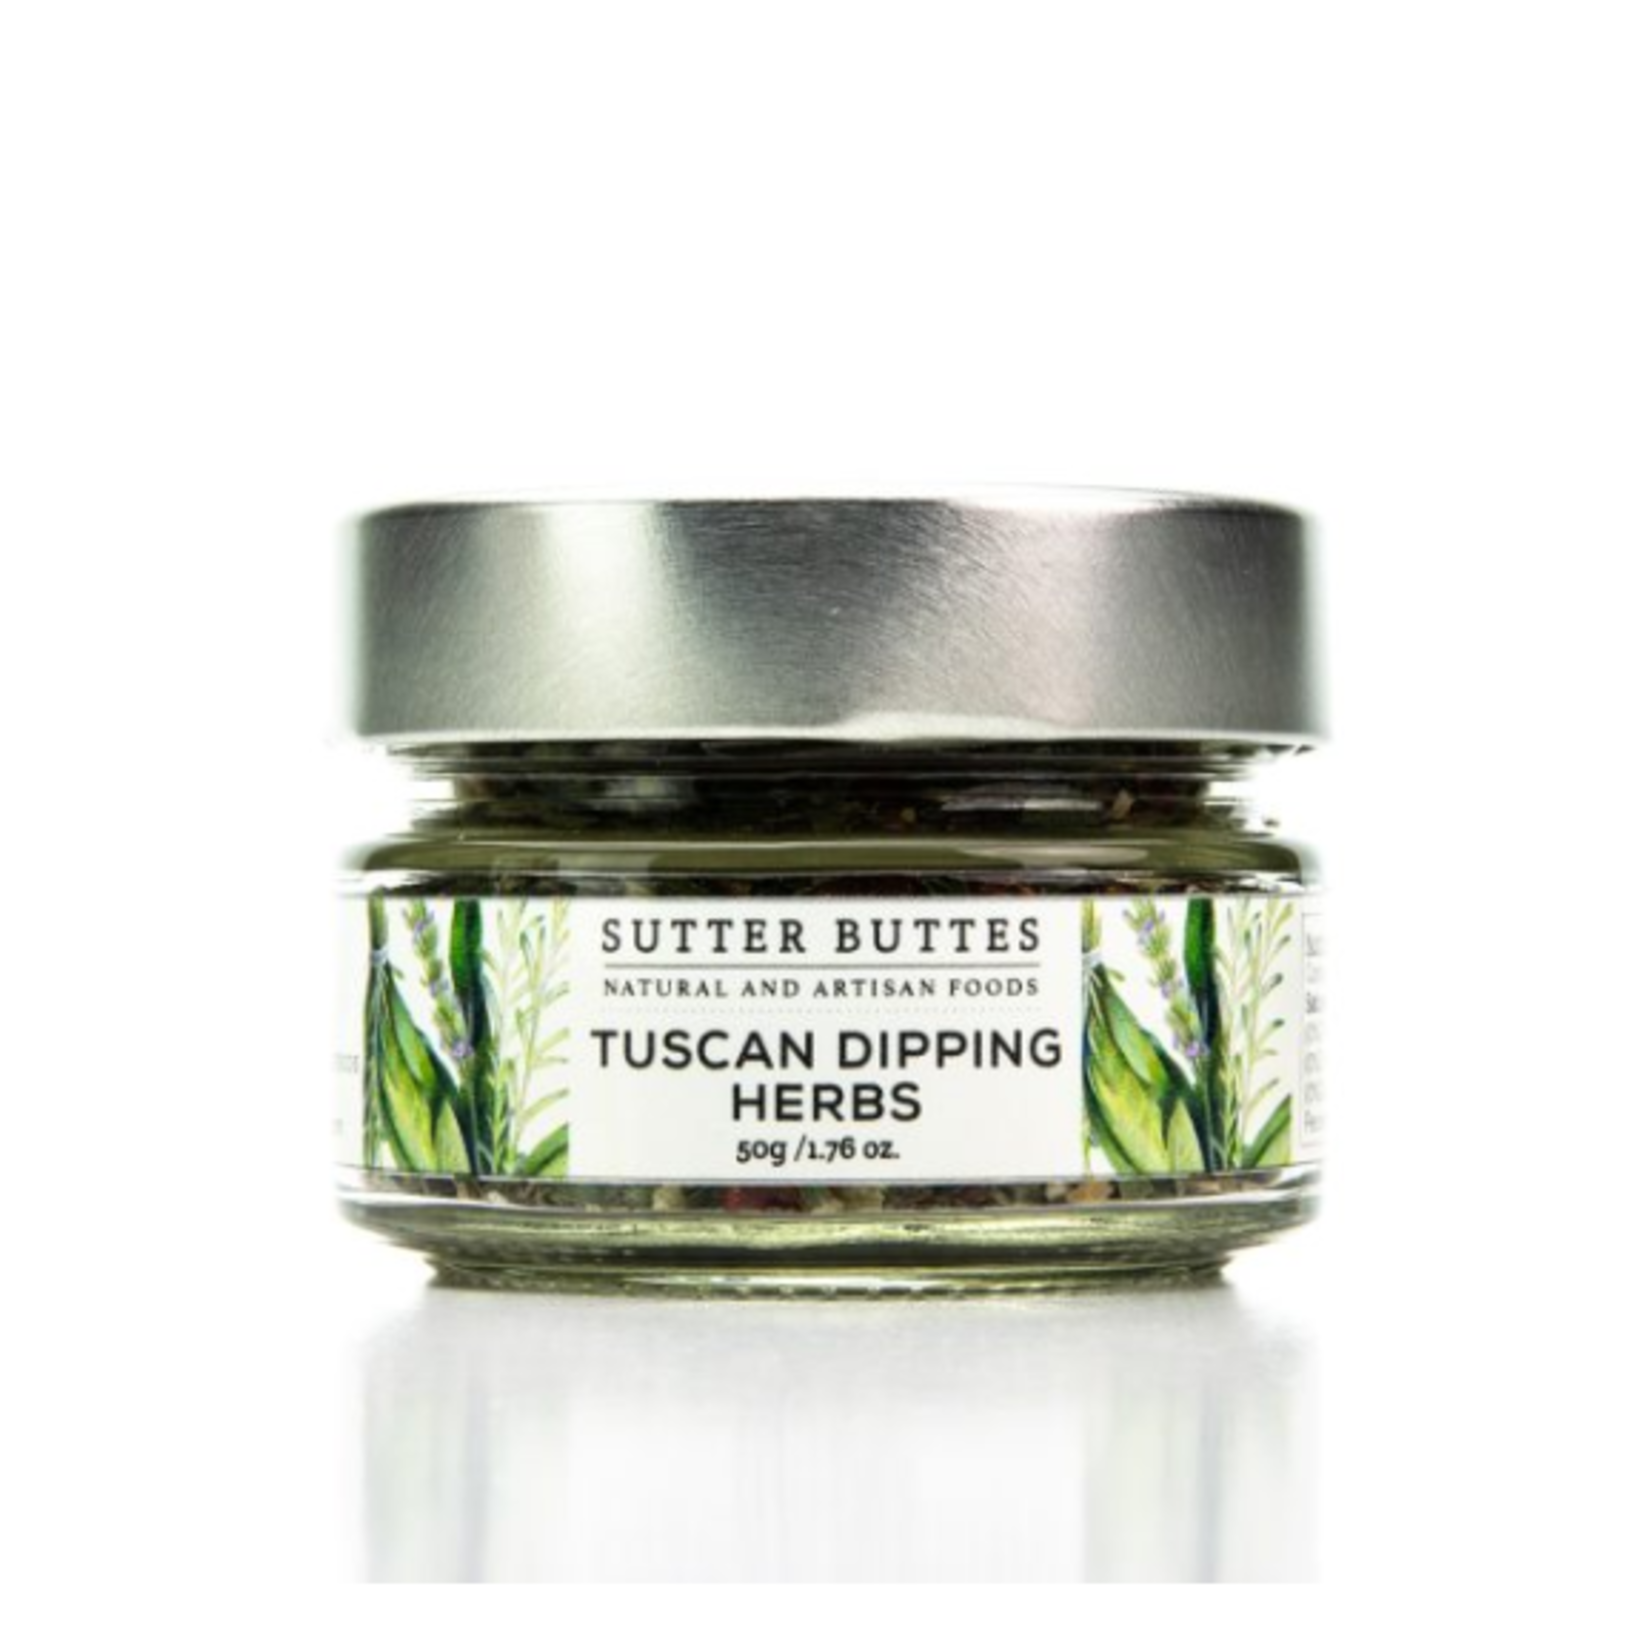 Sutter Buttes Tuscan Dipping Herbs, 1.5oz